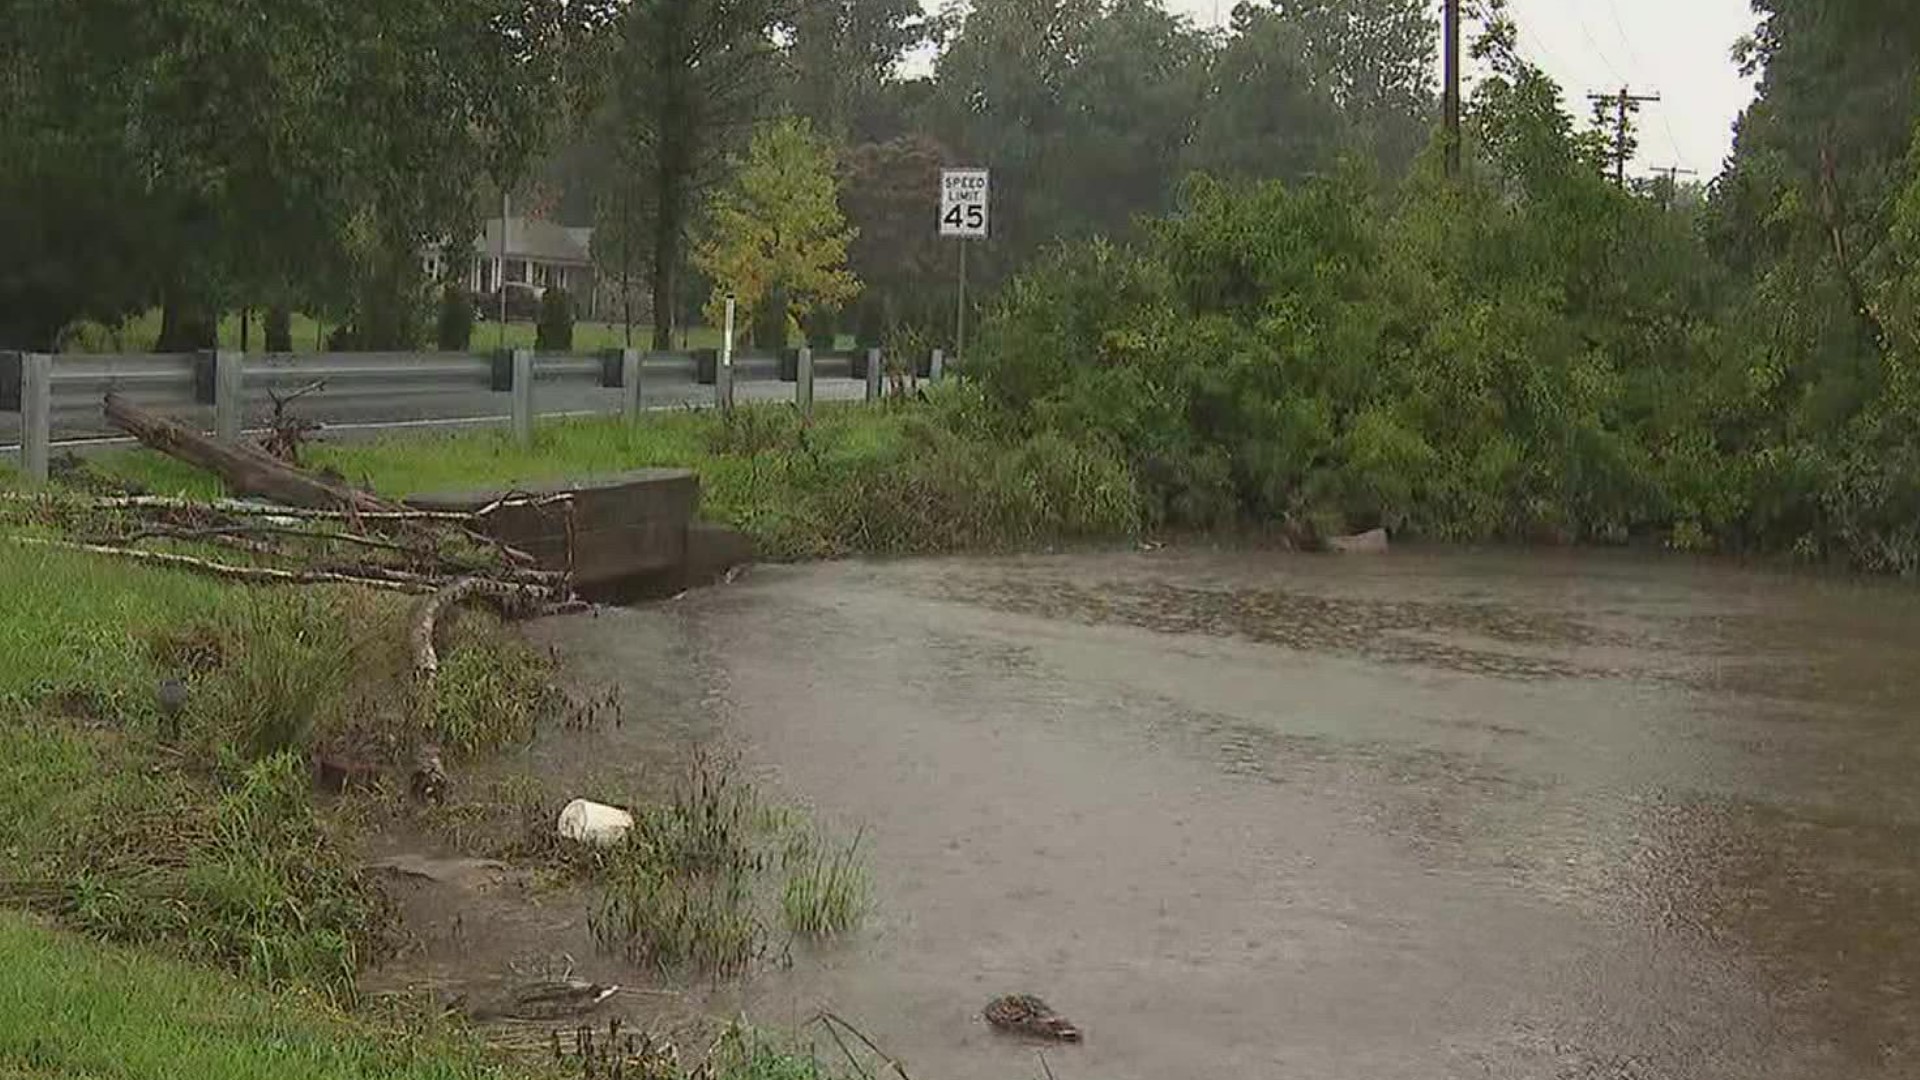 The remnants of Ida moved into Monroe County Wednesday morning, causing flash flooding warnings.